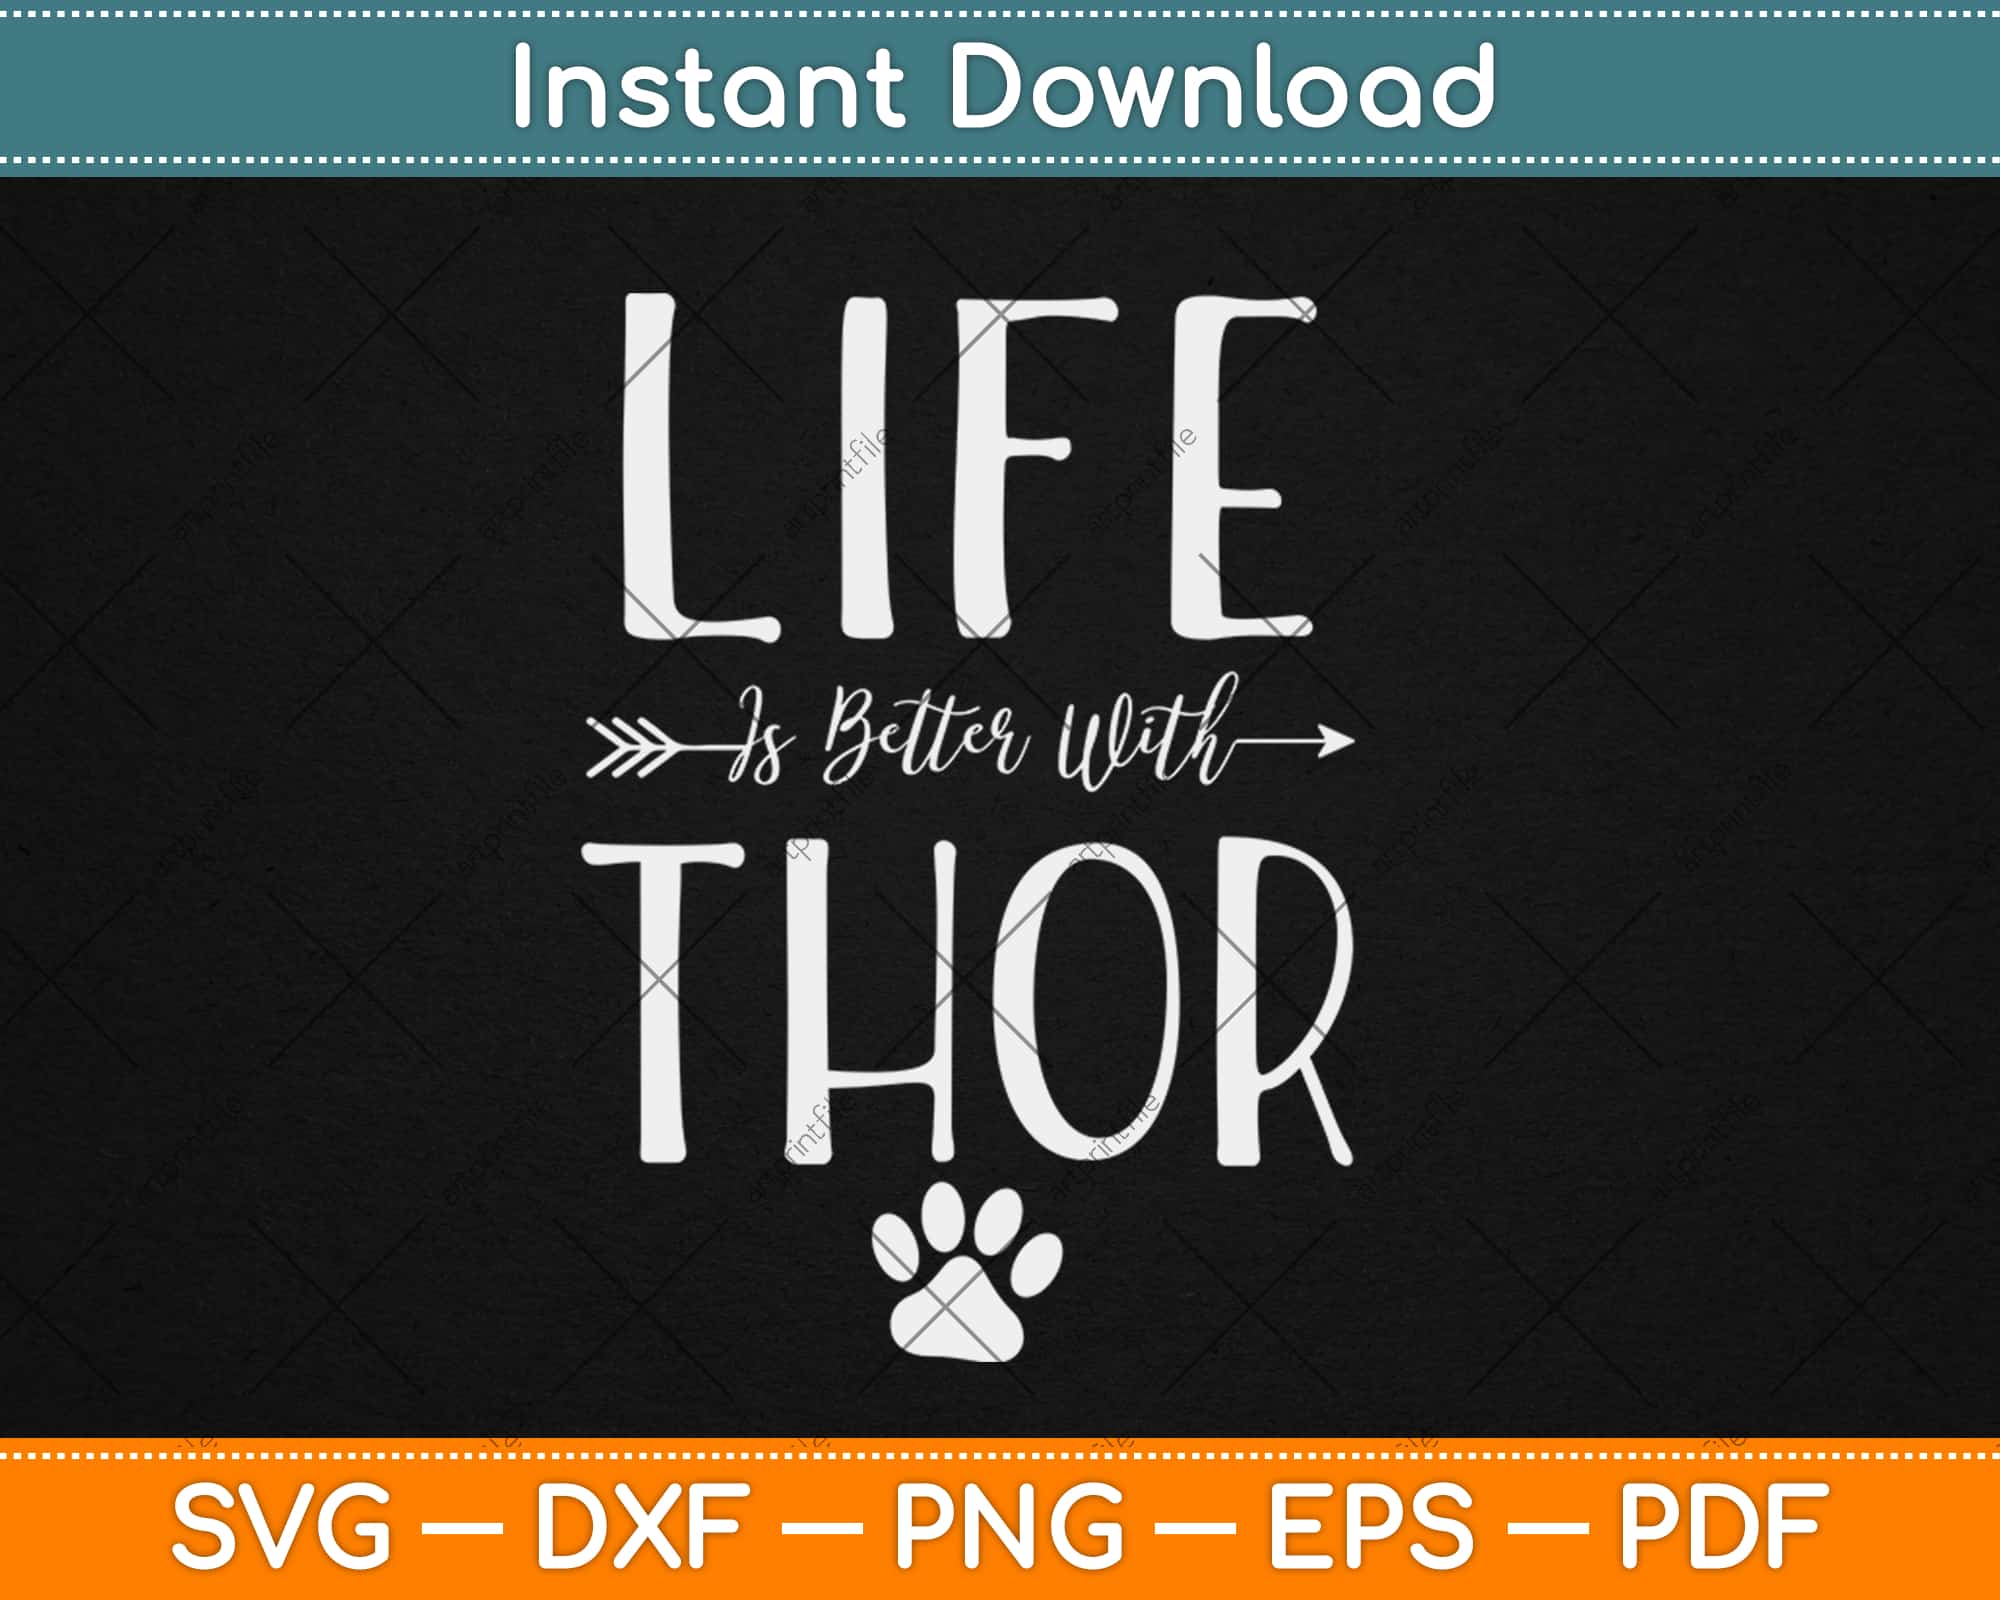 Life Ist Better With Thor Dog Name Svg Png Design Craft Cut File Instant Download Artprintfile